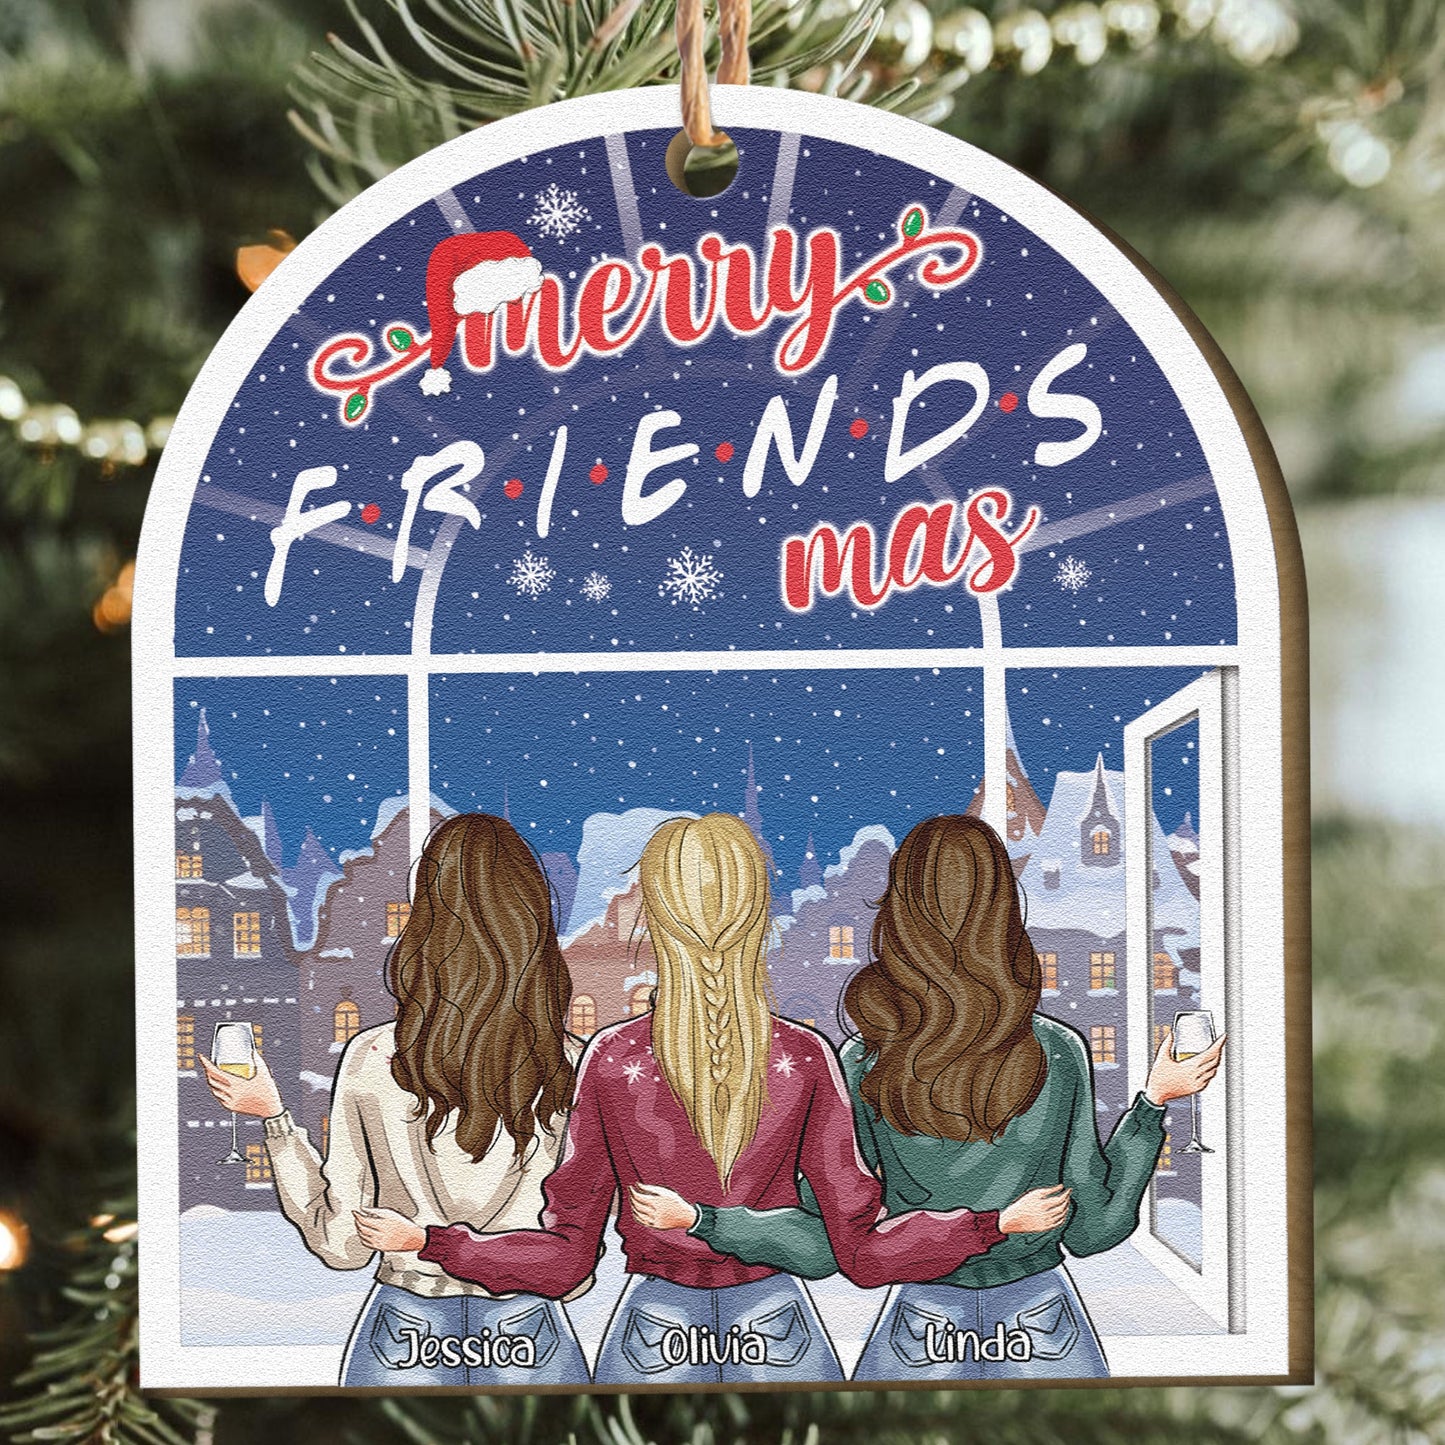 Merry Friendsmas - Personalized Wooden Ornament